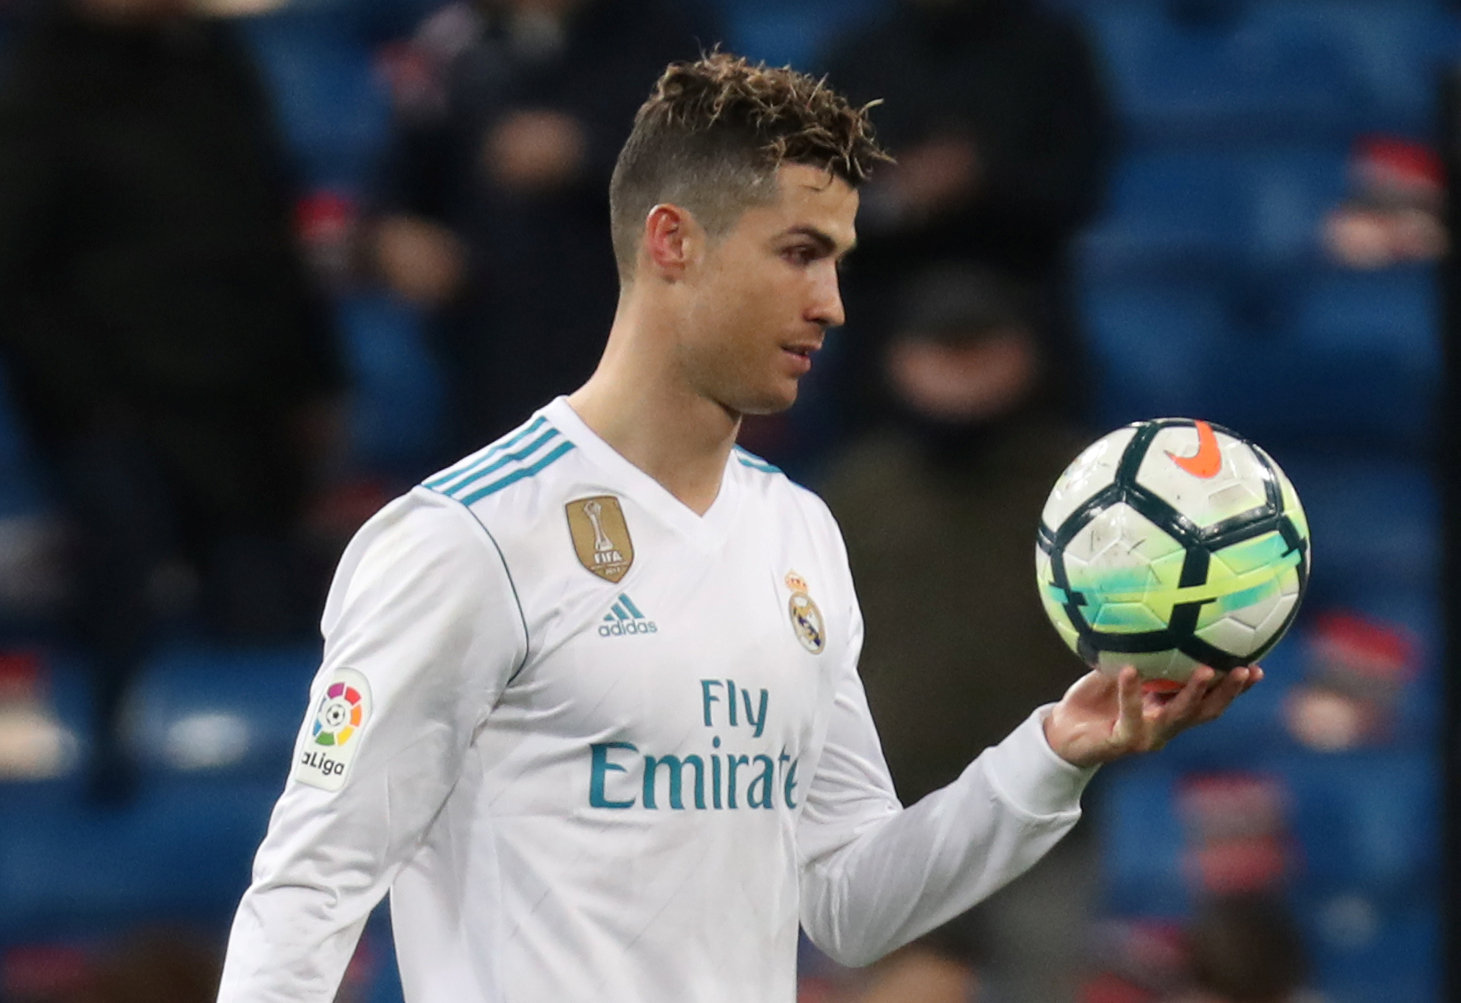 Football: 'Outrageous' Ronaldo has Messi in his sights